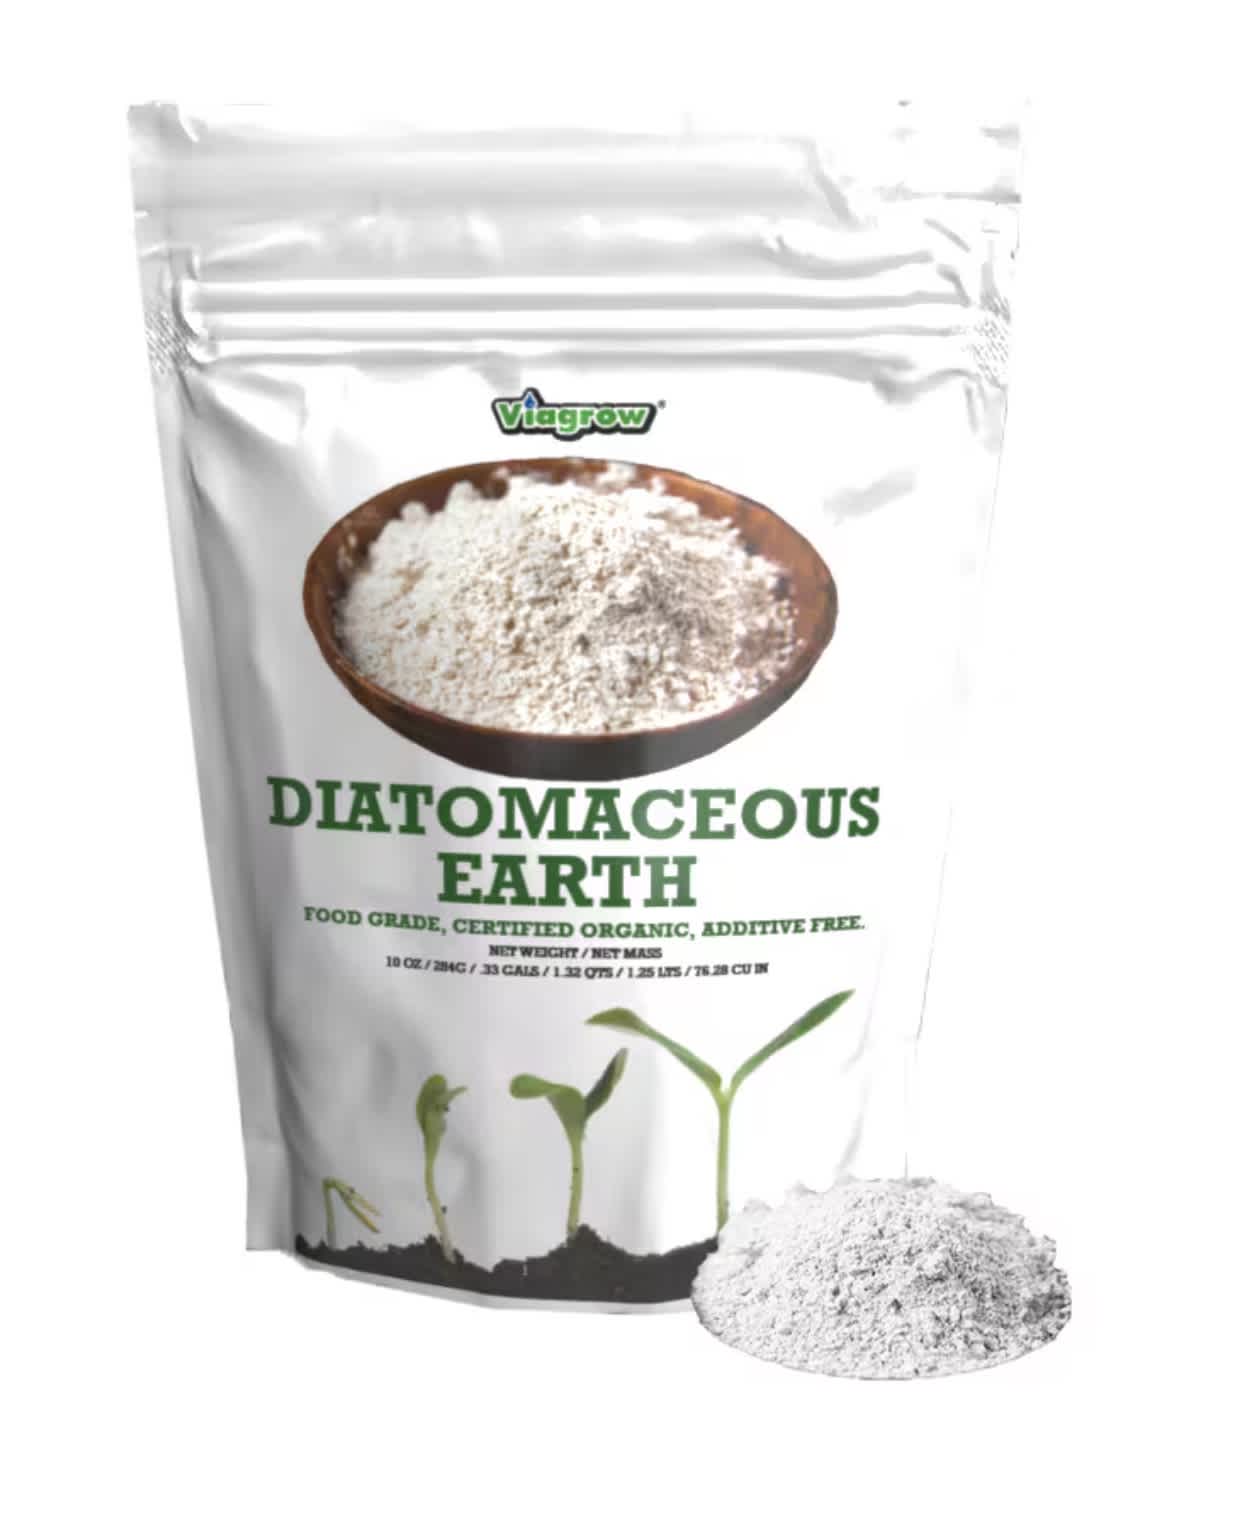 a bag of food grade quality diatomaceous earth